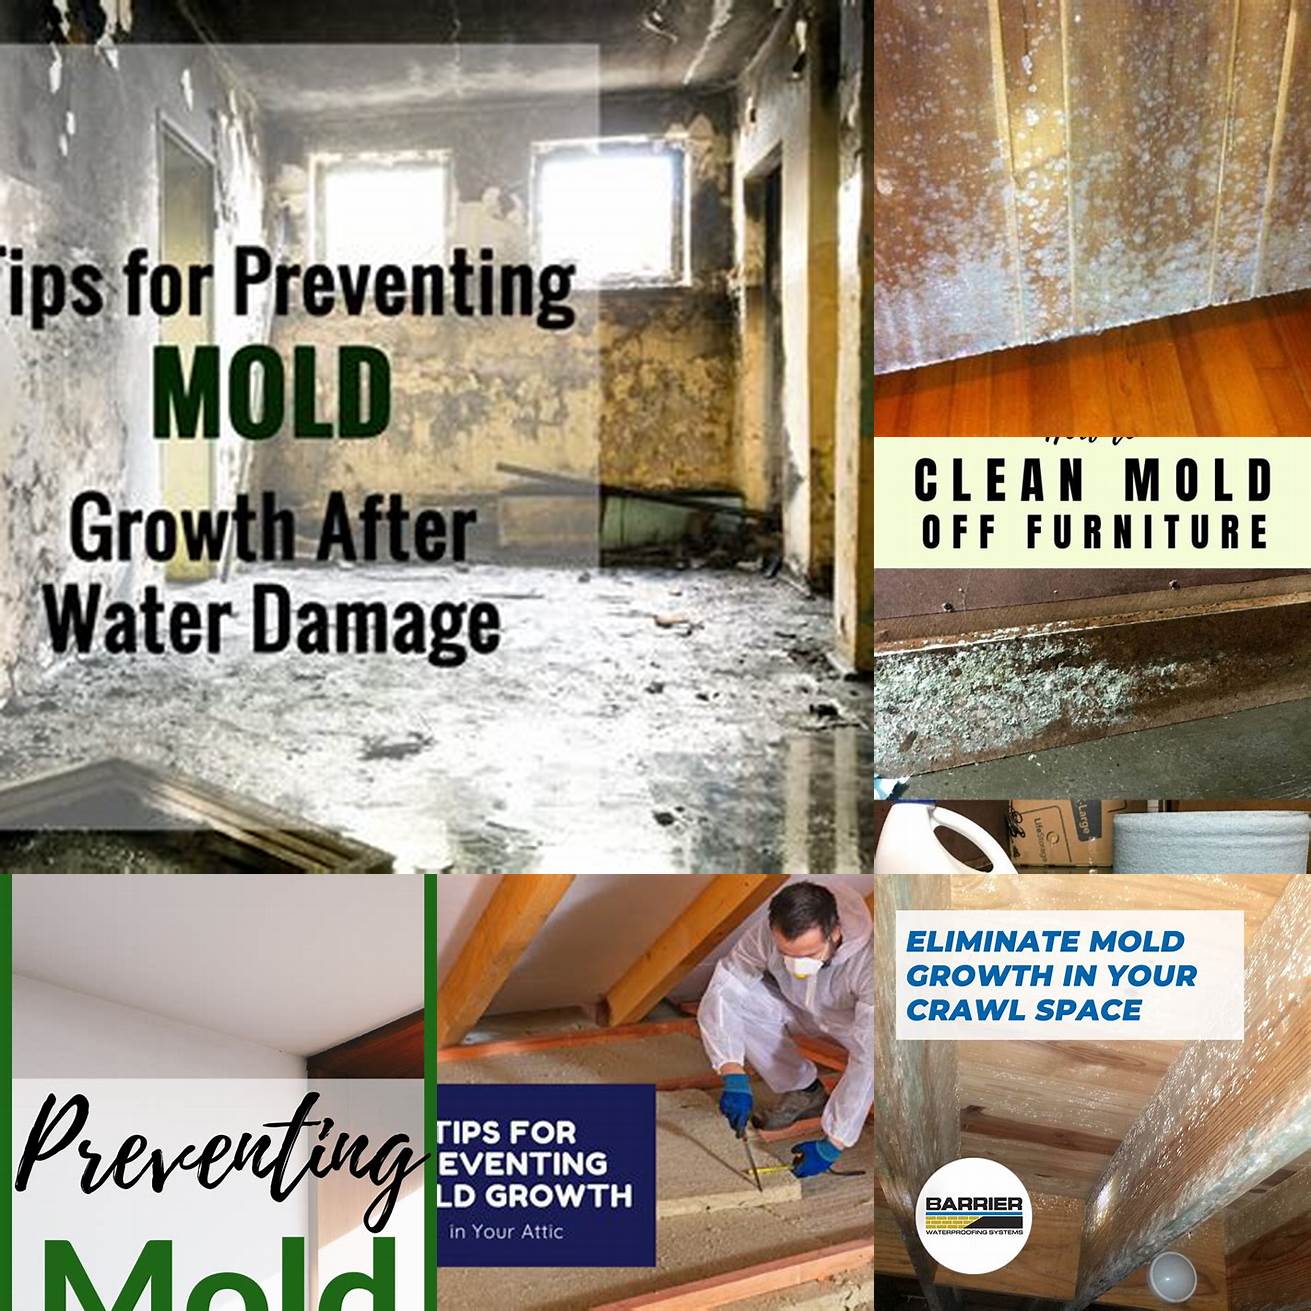 Preventing future mold growth